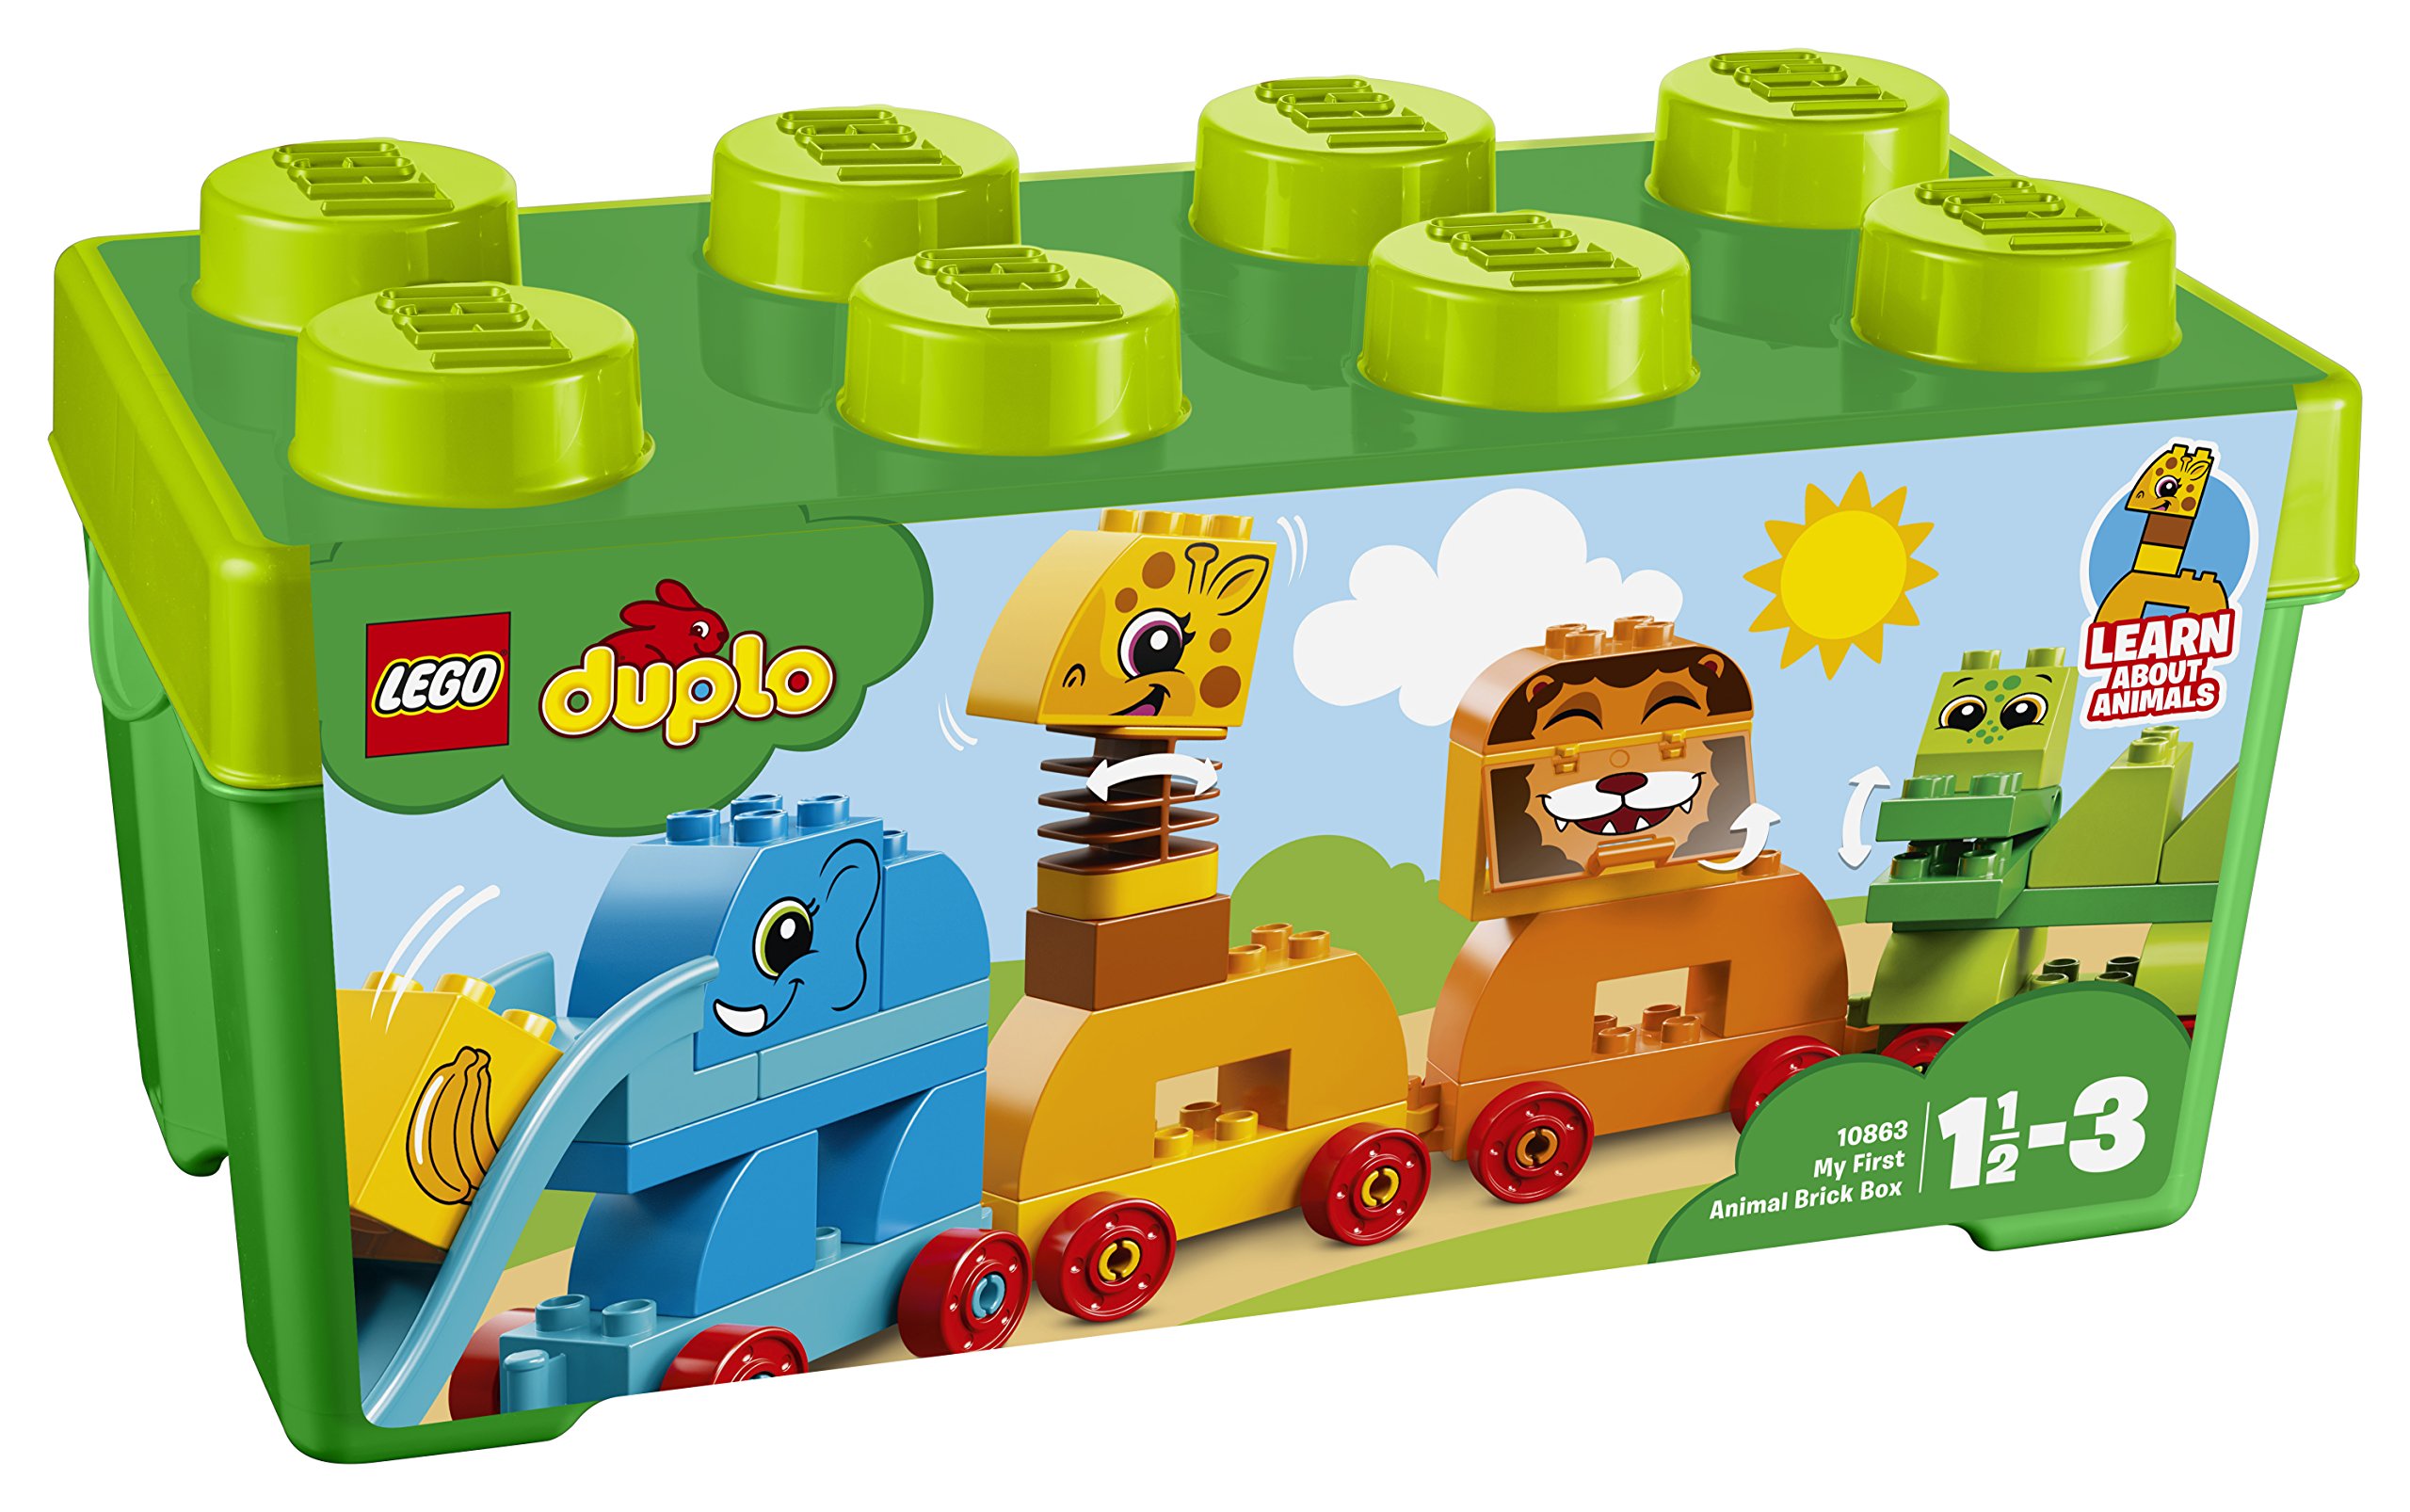 Lego Duplo Imaginary Play My First Stone Box With Animals